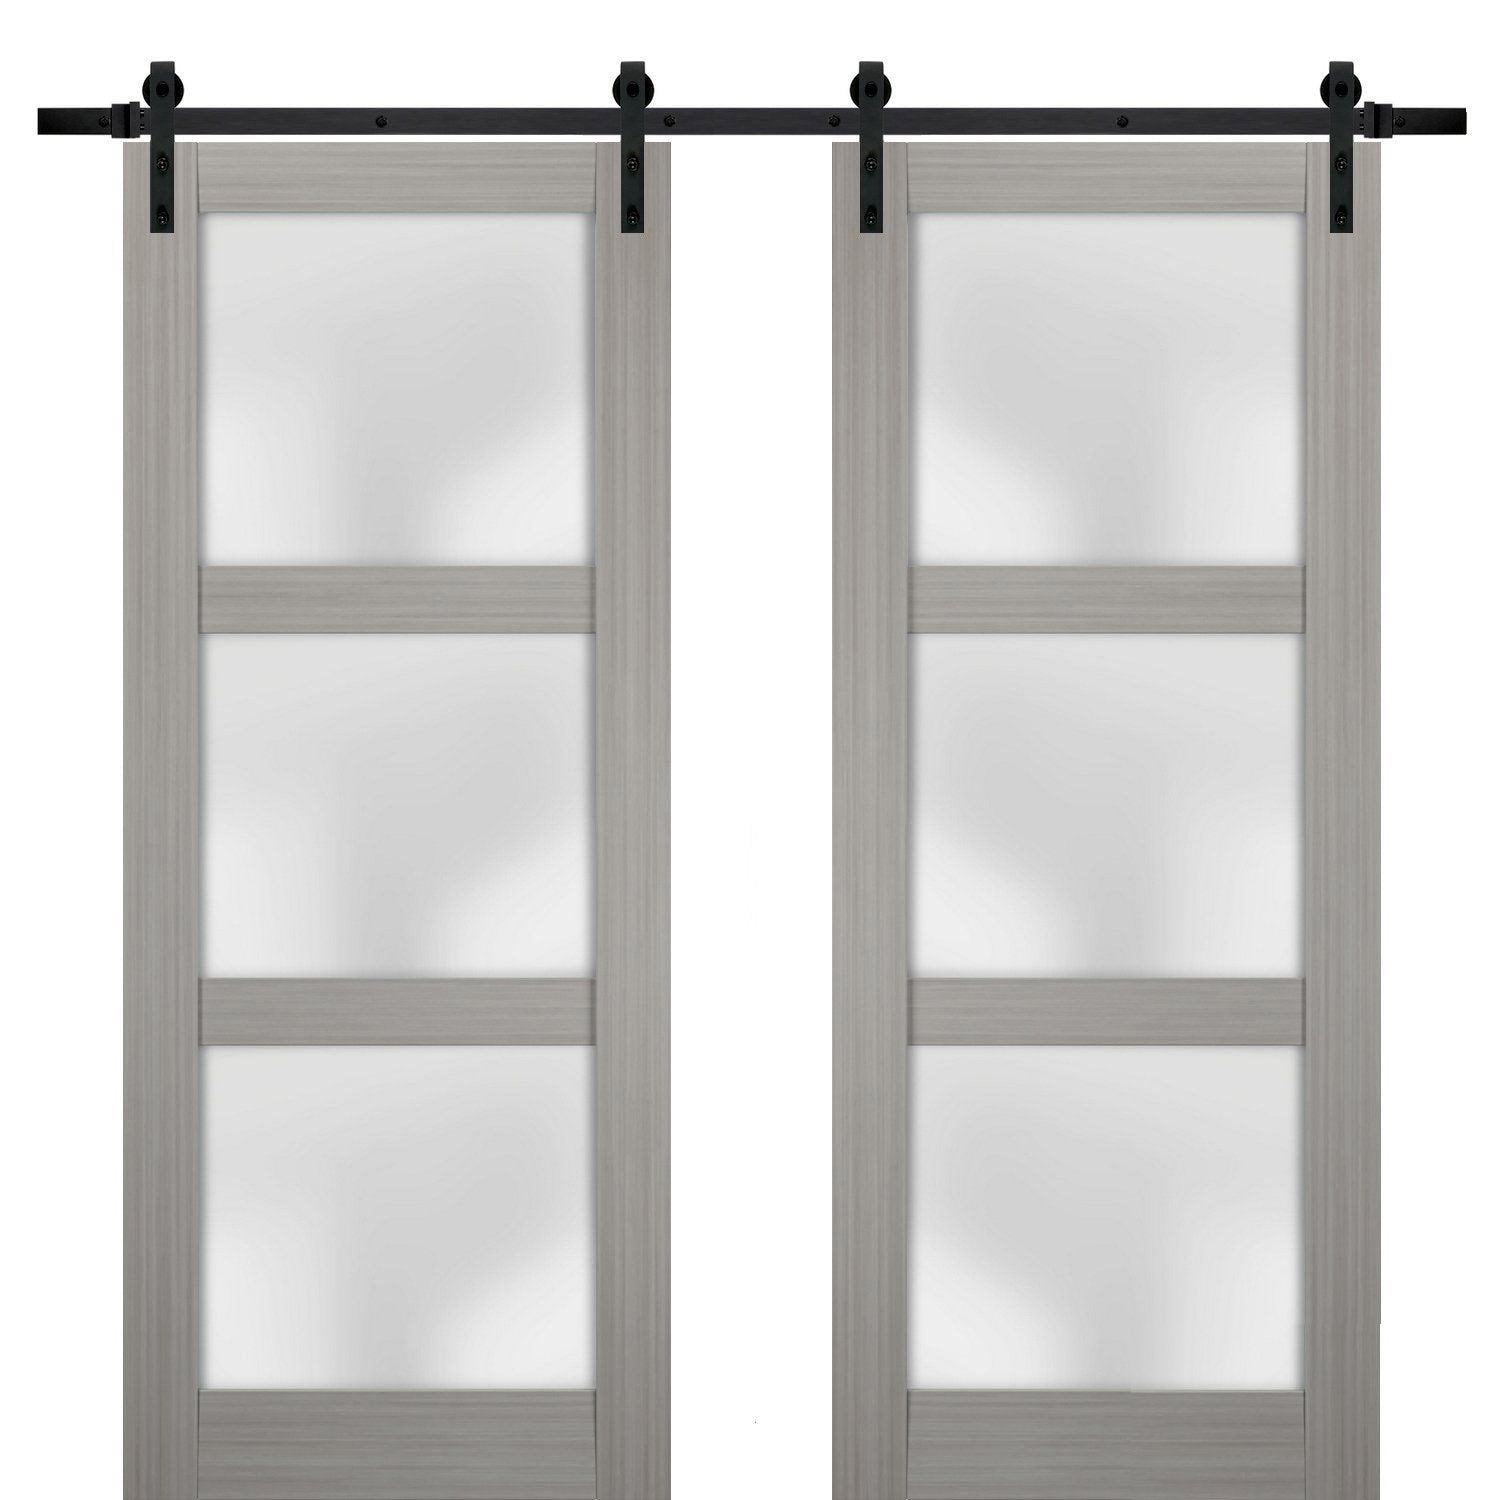 Lucia 2552 Grey Ash Double Barn Door with Frosted Glass | Black Rail